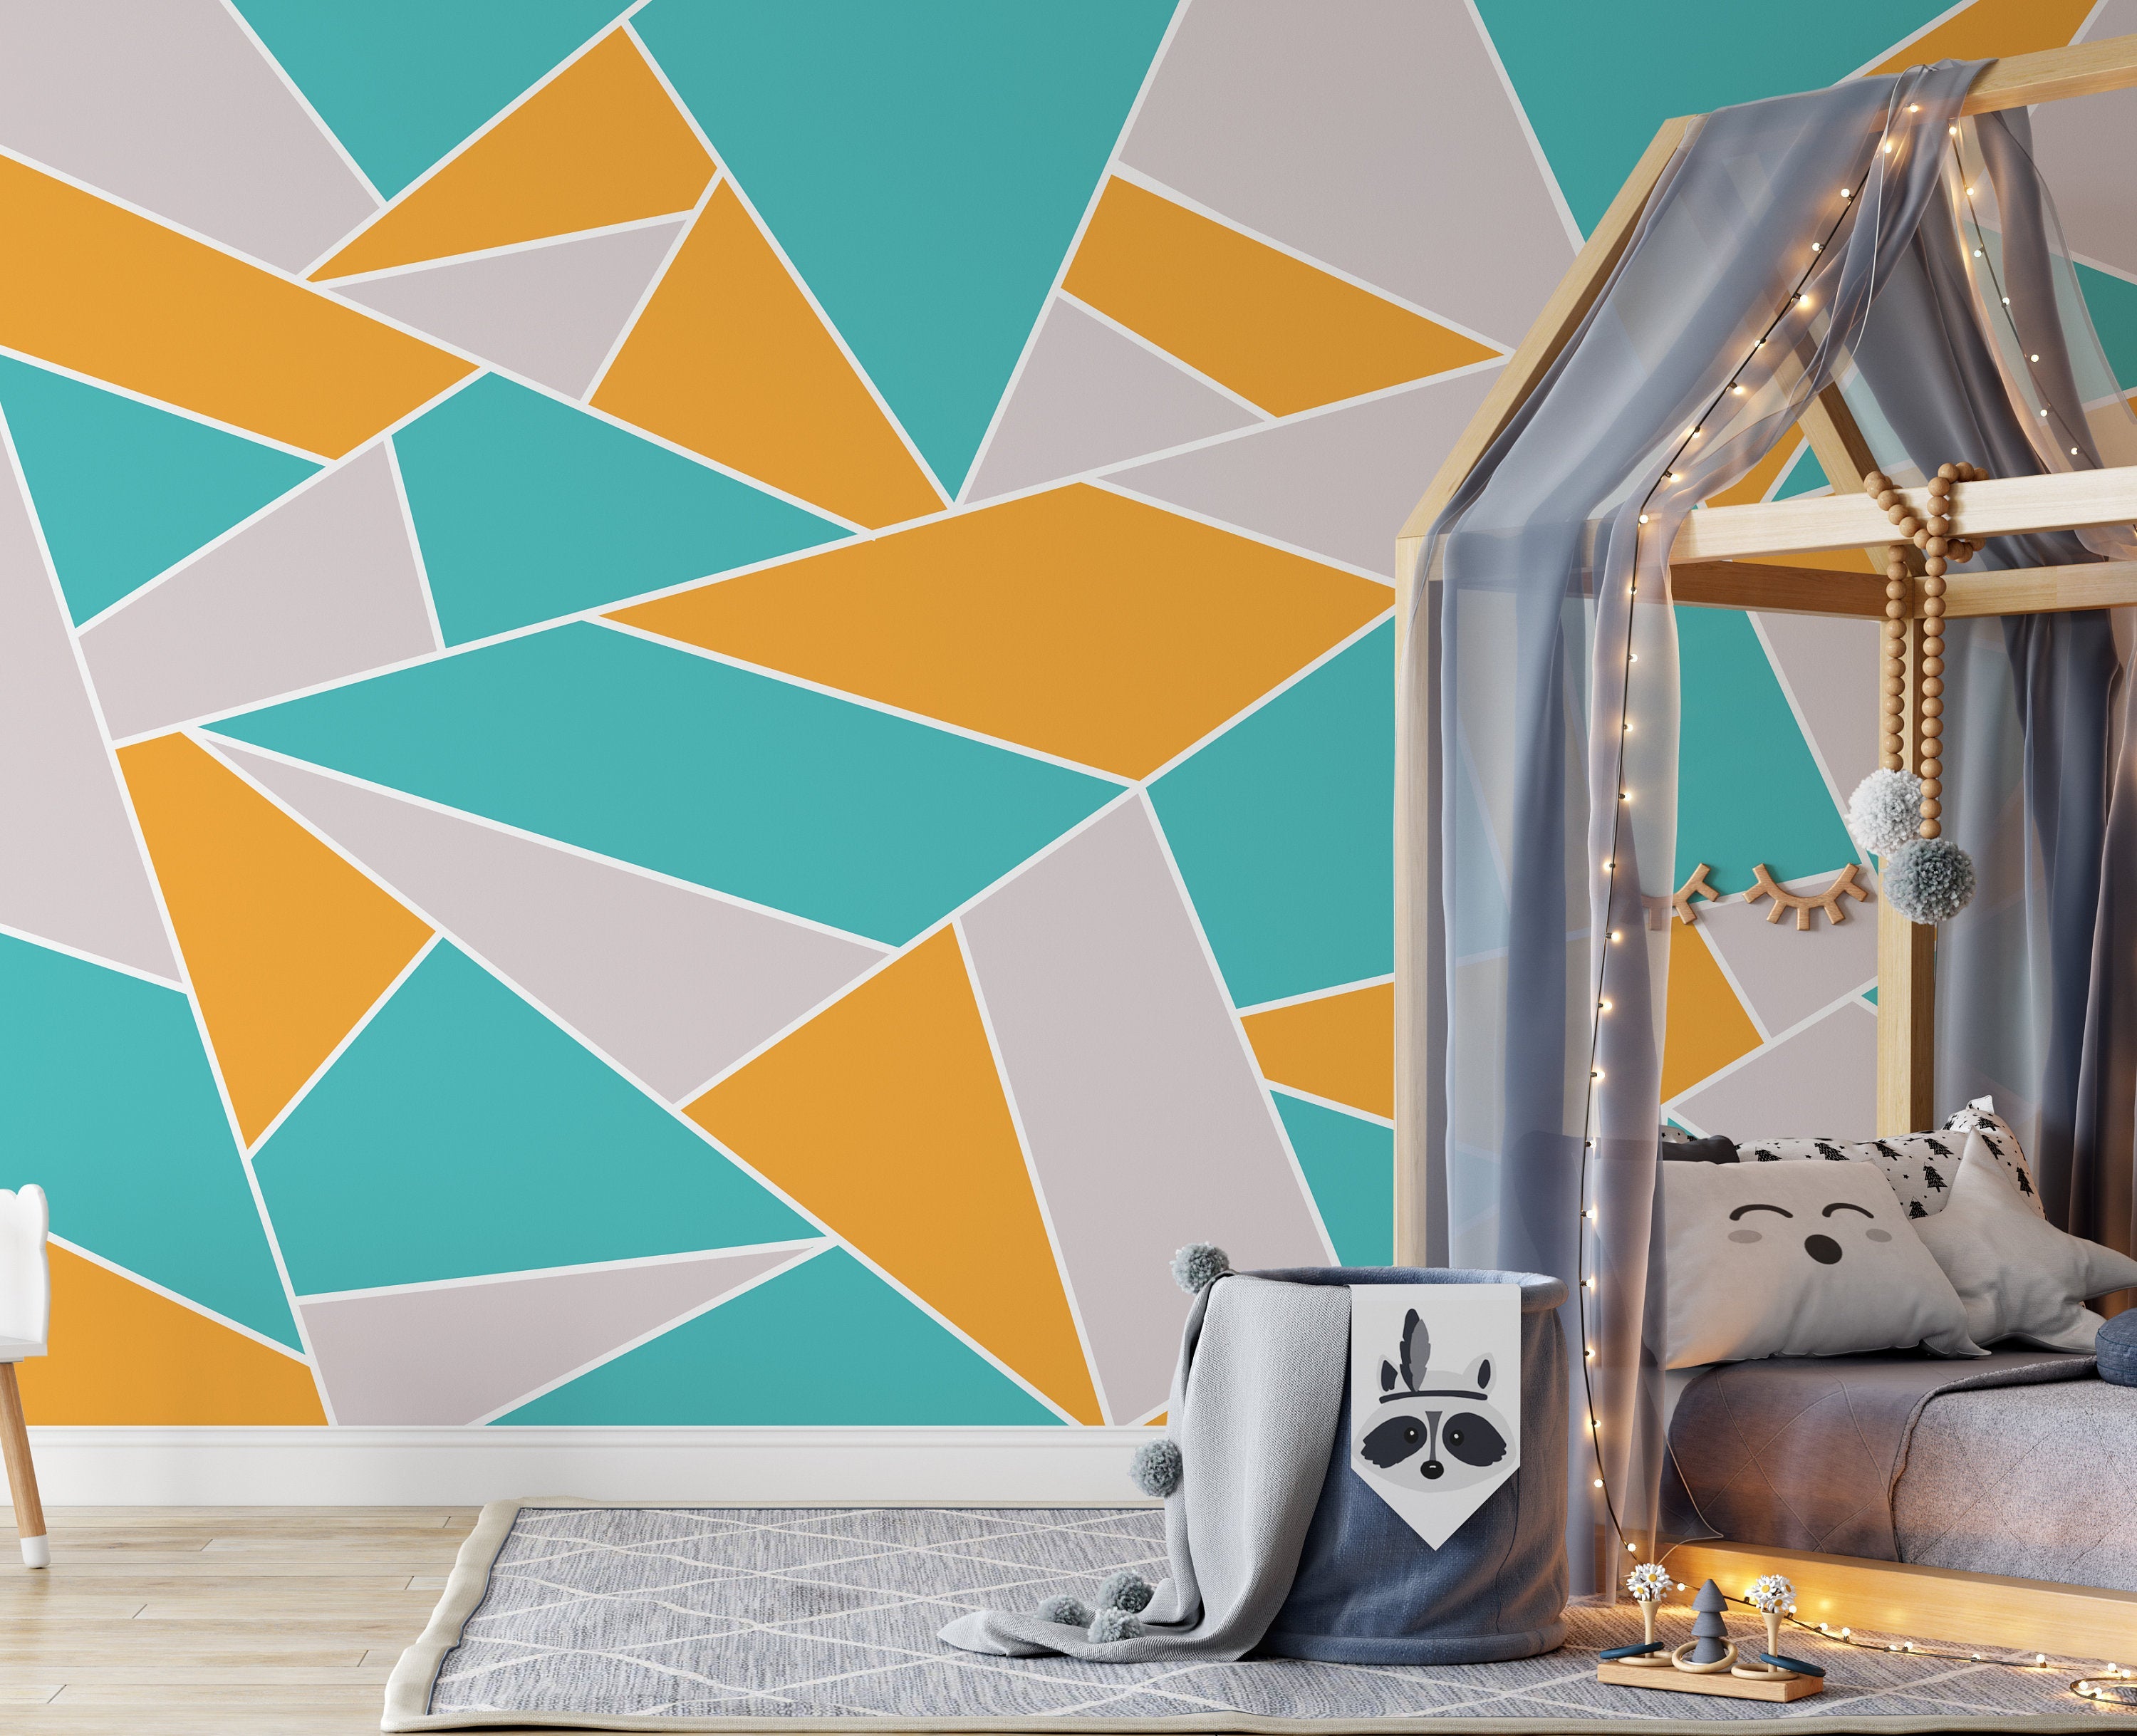 Geometric Colorful Trapezoid Shapes Modern Design Wallpaper Kids Room Children Wall Decor Mural Art Removable